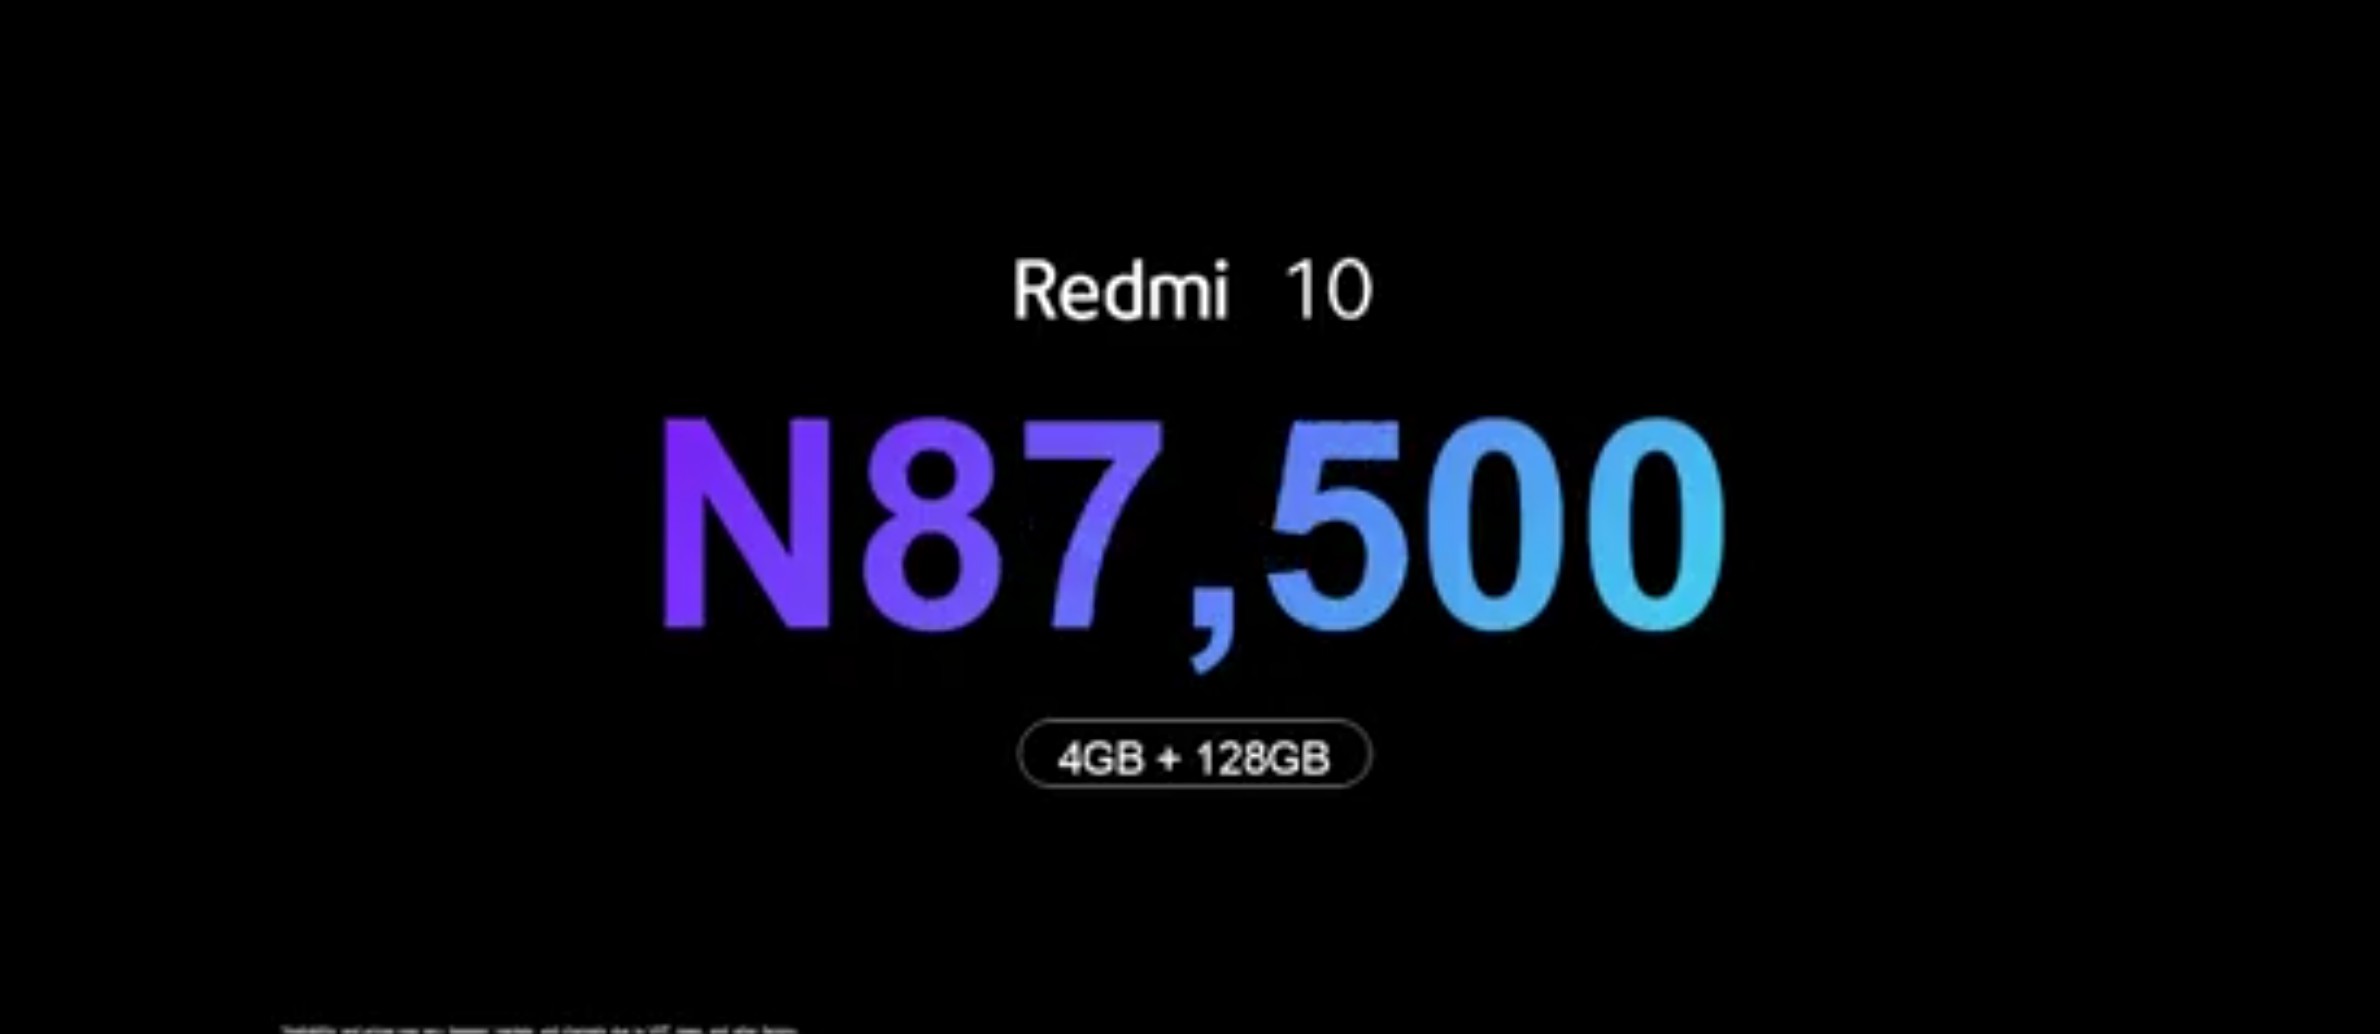 Redmi 10 with 50MP camera arrives in Nigeria beginning from N85,000